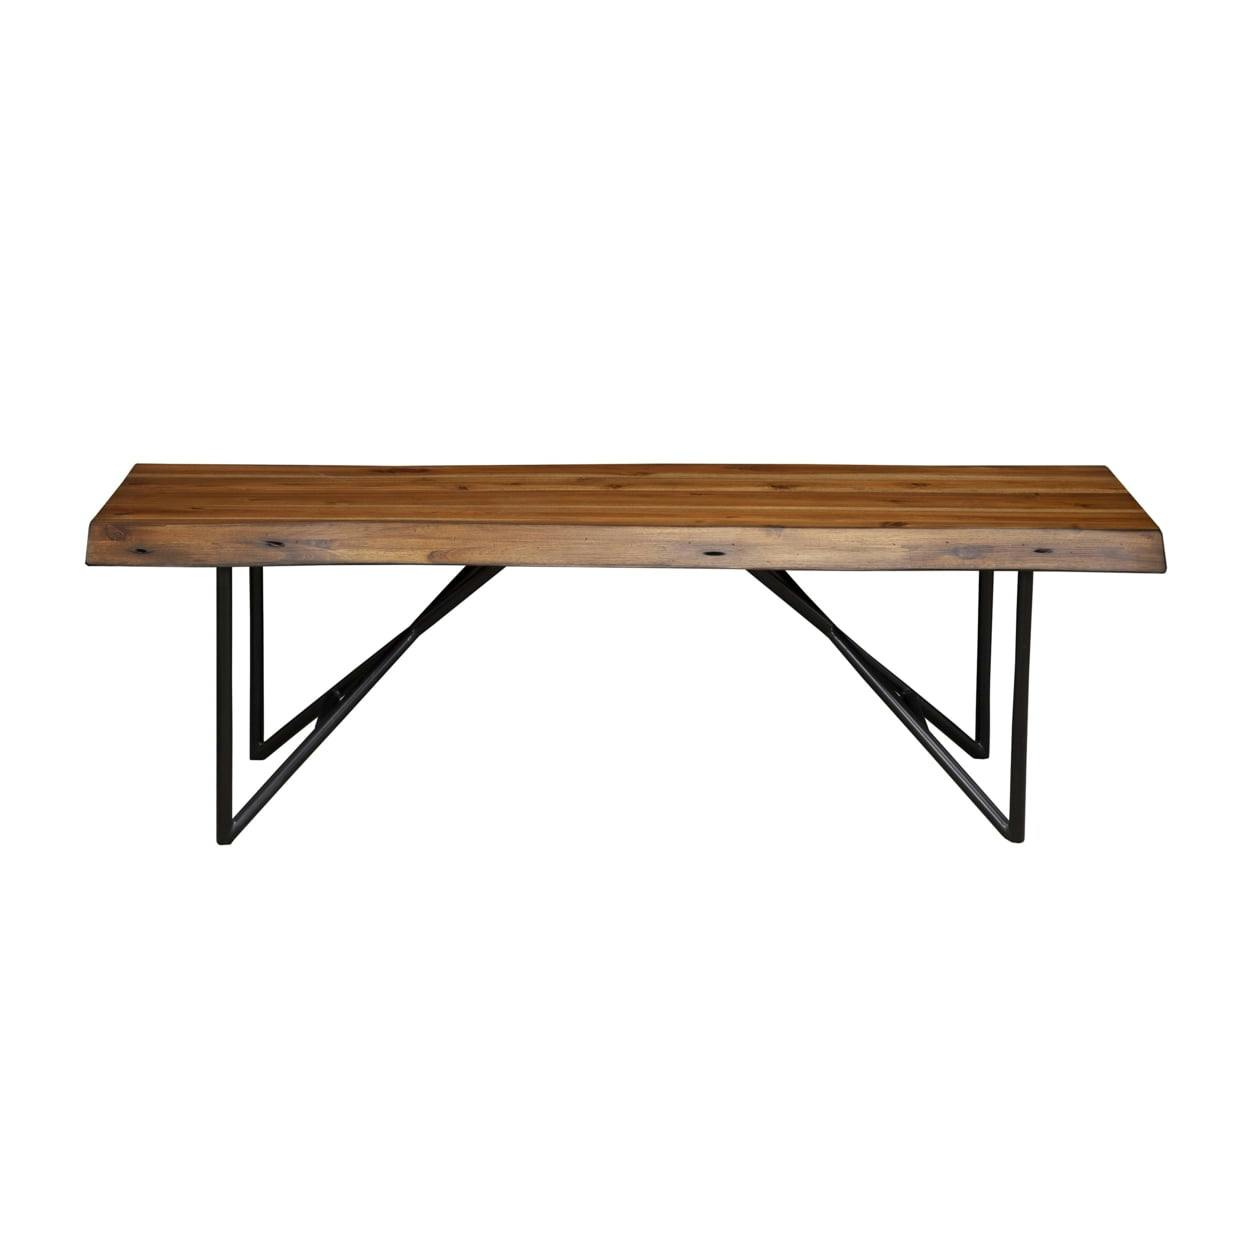 Transitional Live Edge Acacia Wood Bench with Metal Legs, Brown